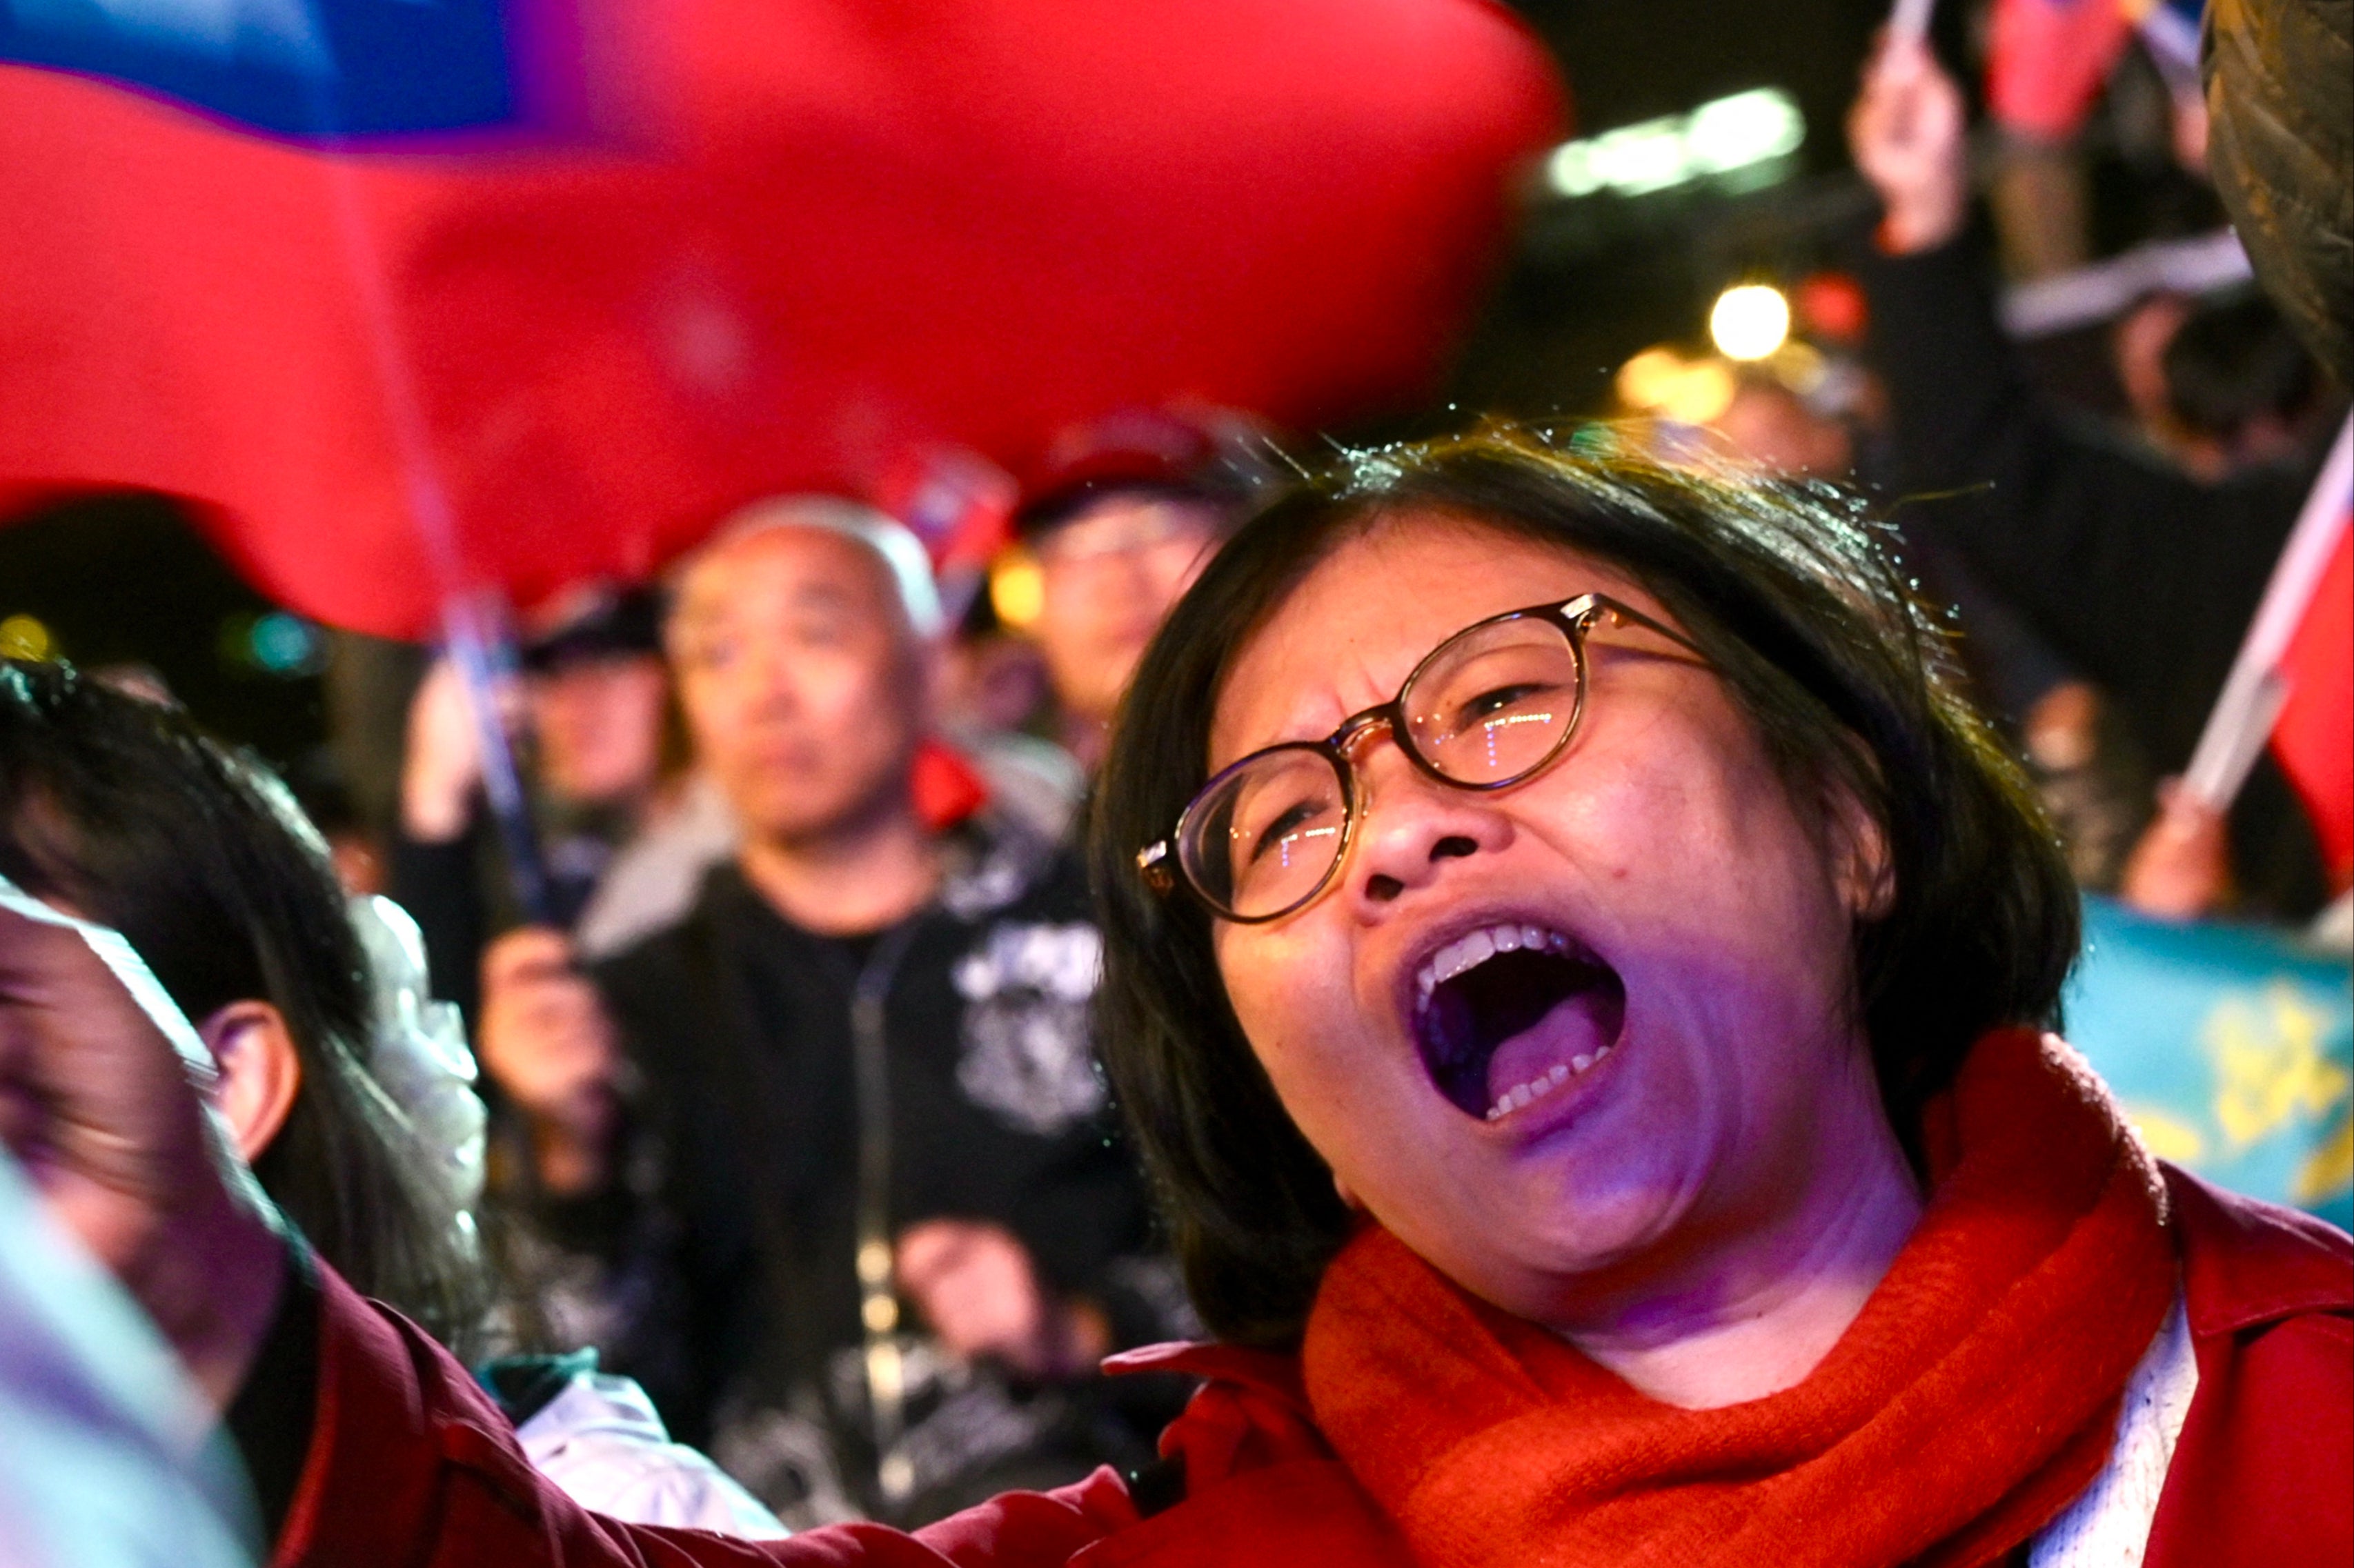 taiwan’s new president lai ching-te issues defiant message to china after historic election win